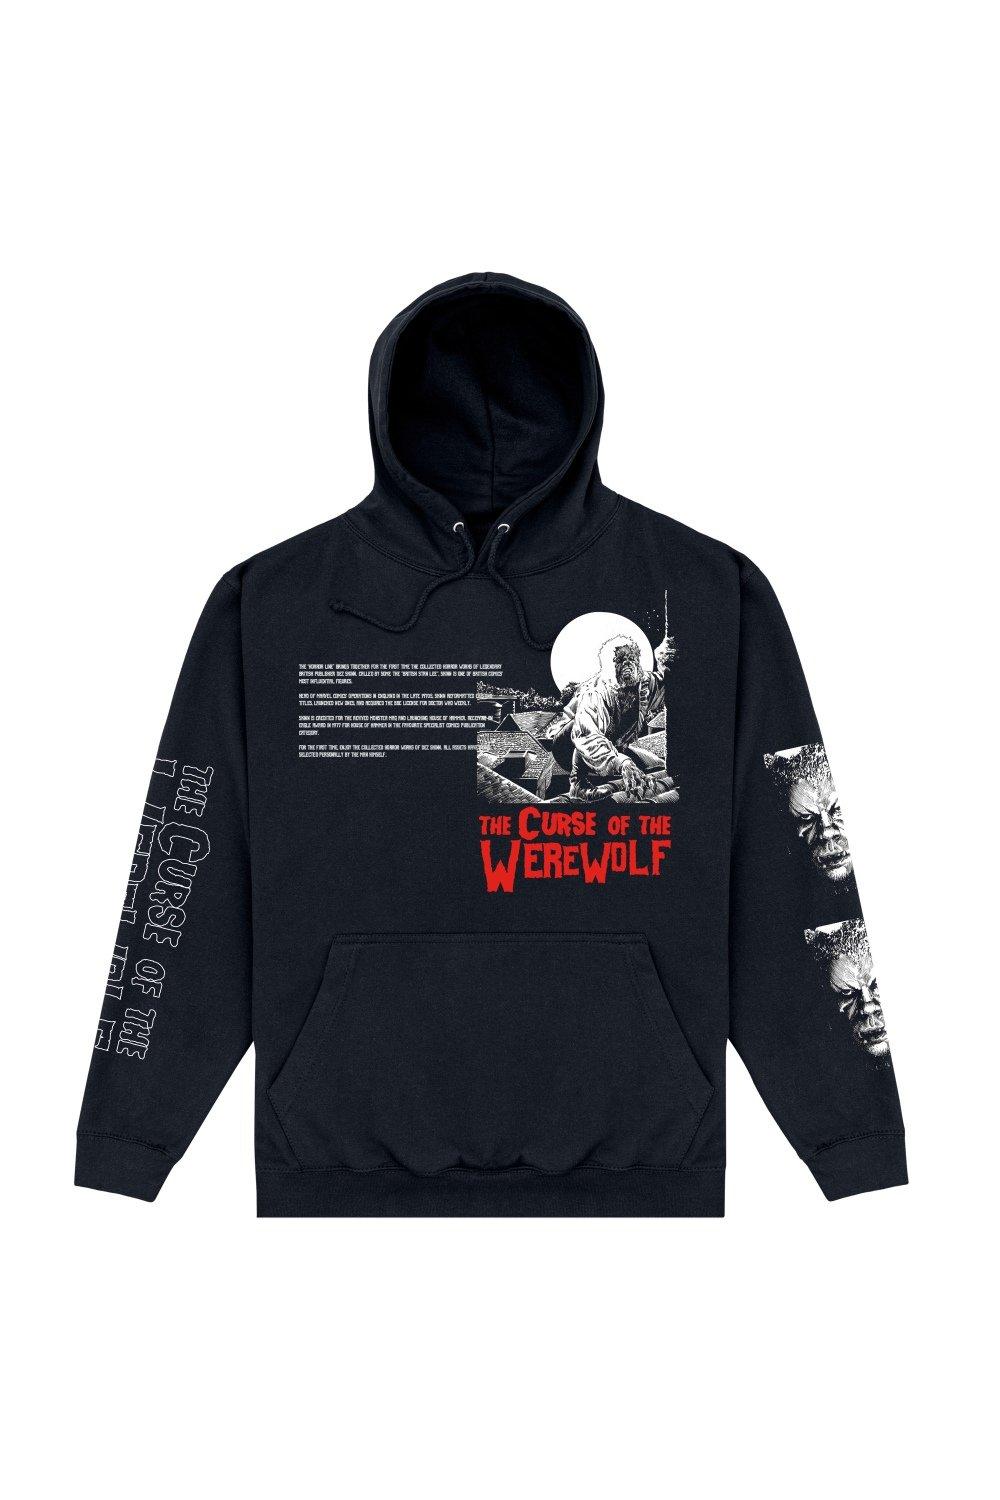 Curse Of The Werewolf Multi Graphic Hoodie OTH